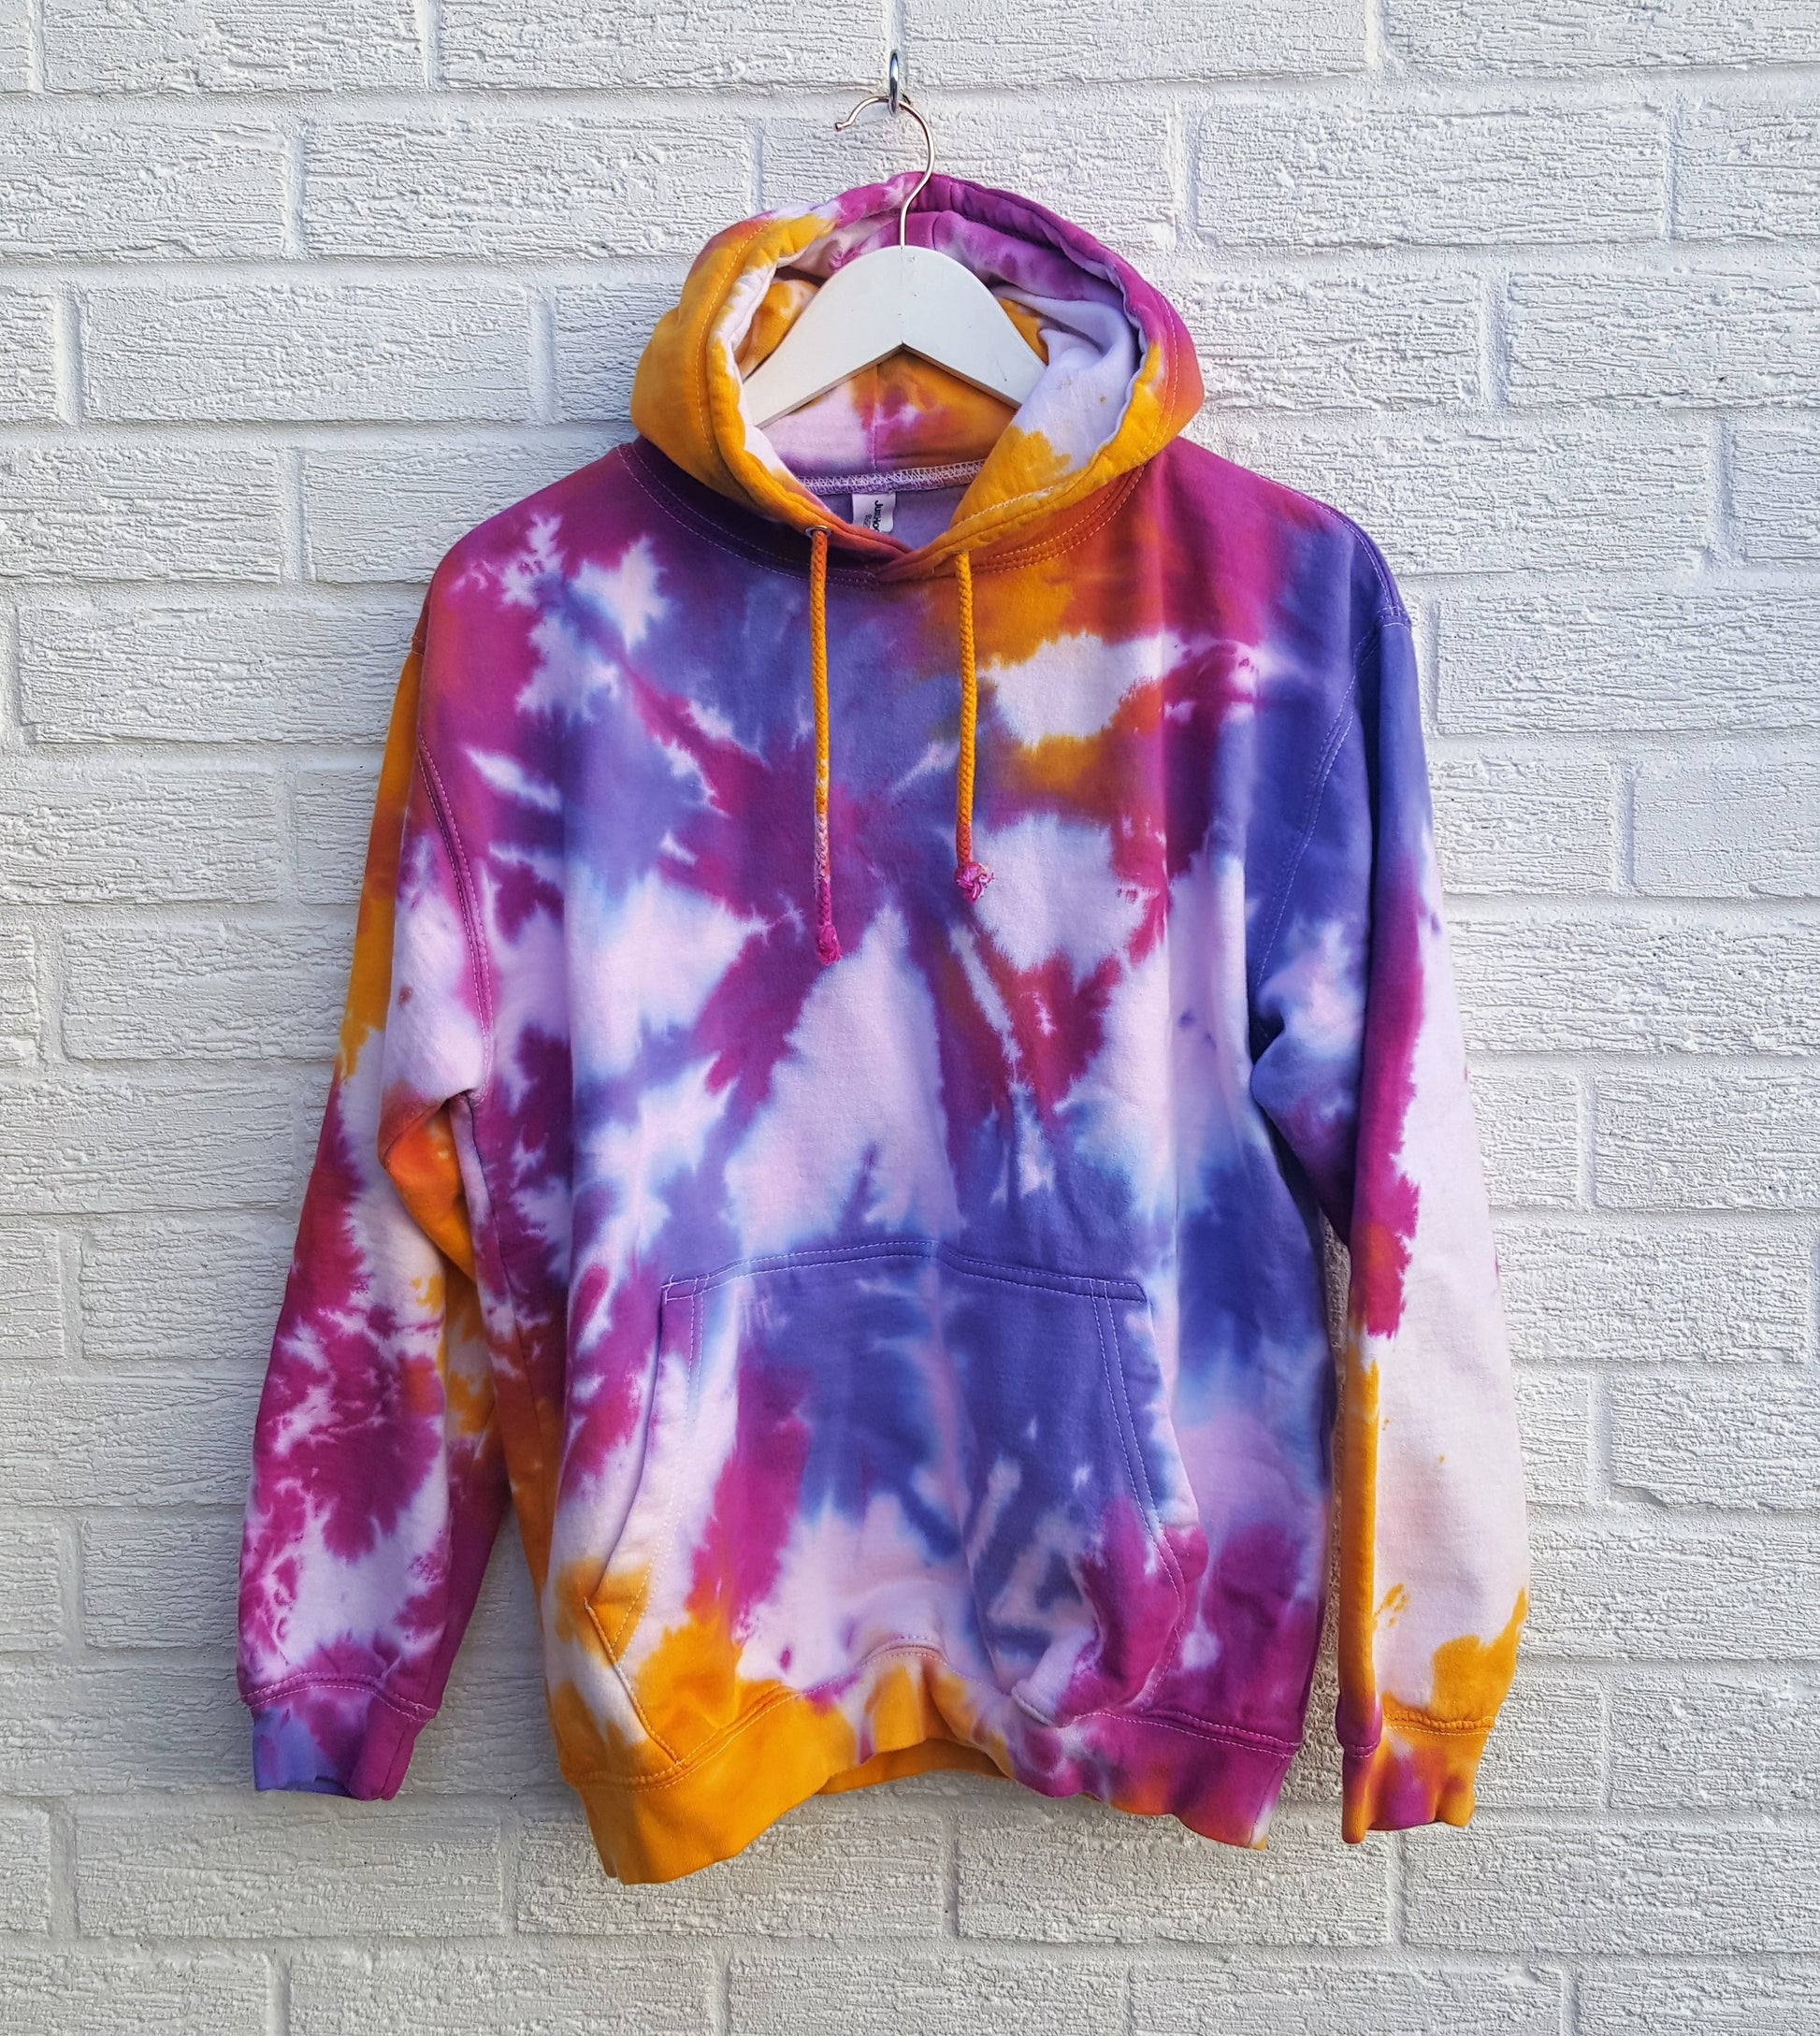 Tie dye hoodie, in orange, pink & purple shades, the perfect colourful cover up for the coming festive season, in men's/unisex sizes.  These one of a kind hoodies are hand dyed to order, in 80% Organic Cotton, 20% Recycled Polyester, double fabric hood, front pouch pocket, ribbed cuffs and hem.  Hand dyed in the UK by AbiDashery.